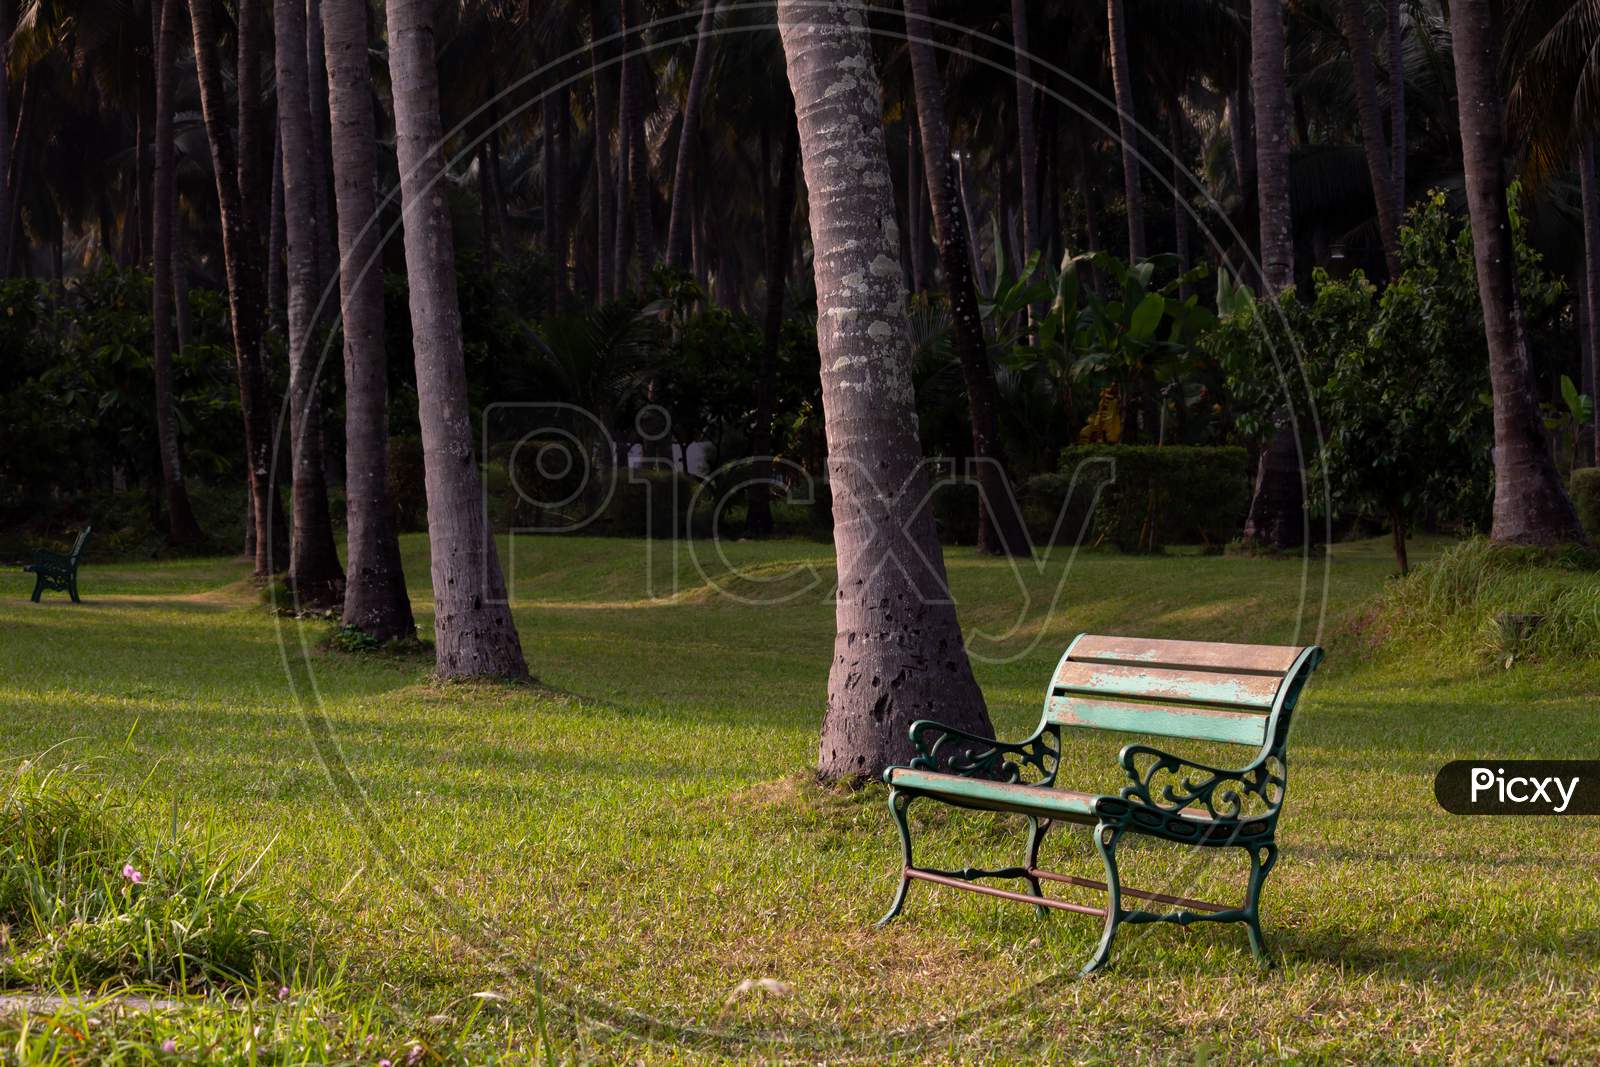 A Steel Bench In A Green Grass Field. Empty Chair In A Park. Focus Set Of Chair Grill